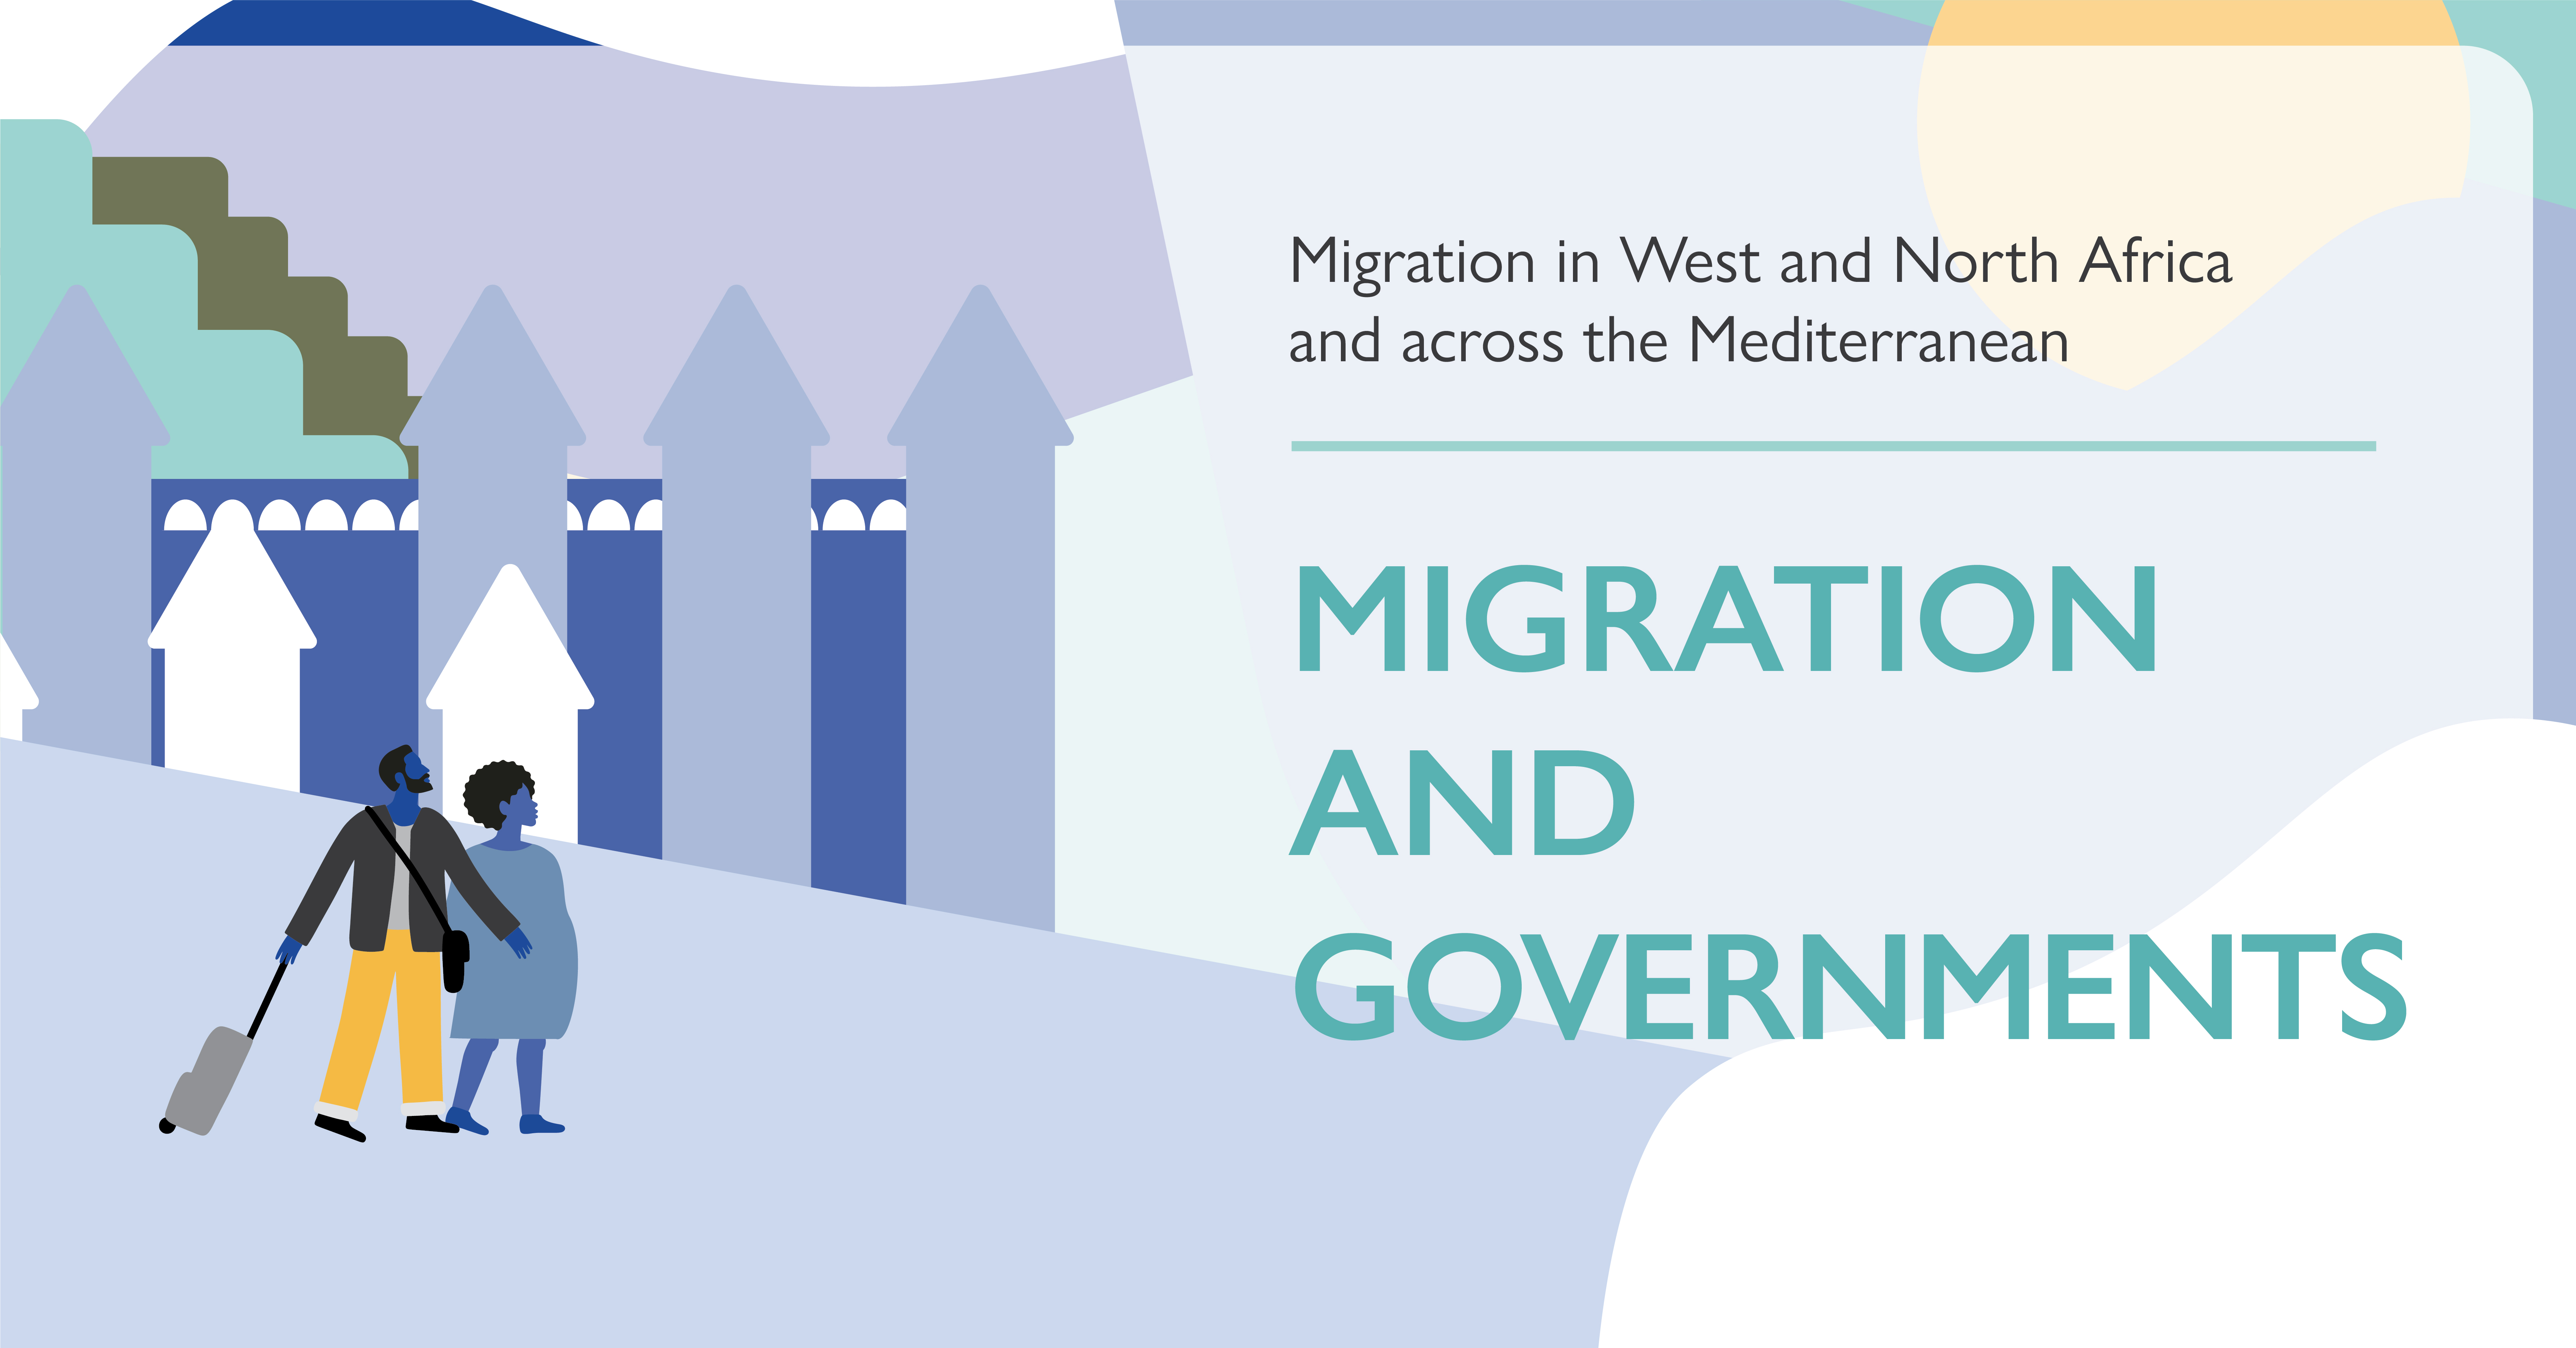 MIGRATION AND GOVERNMENTS